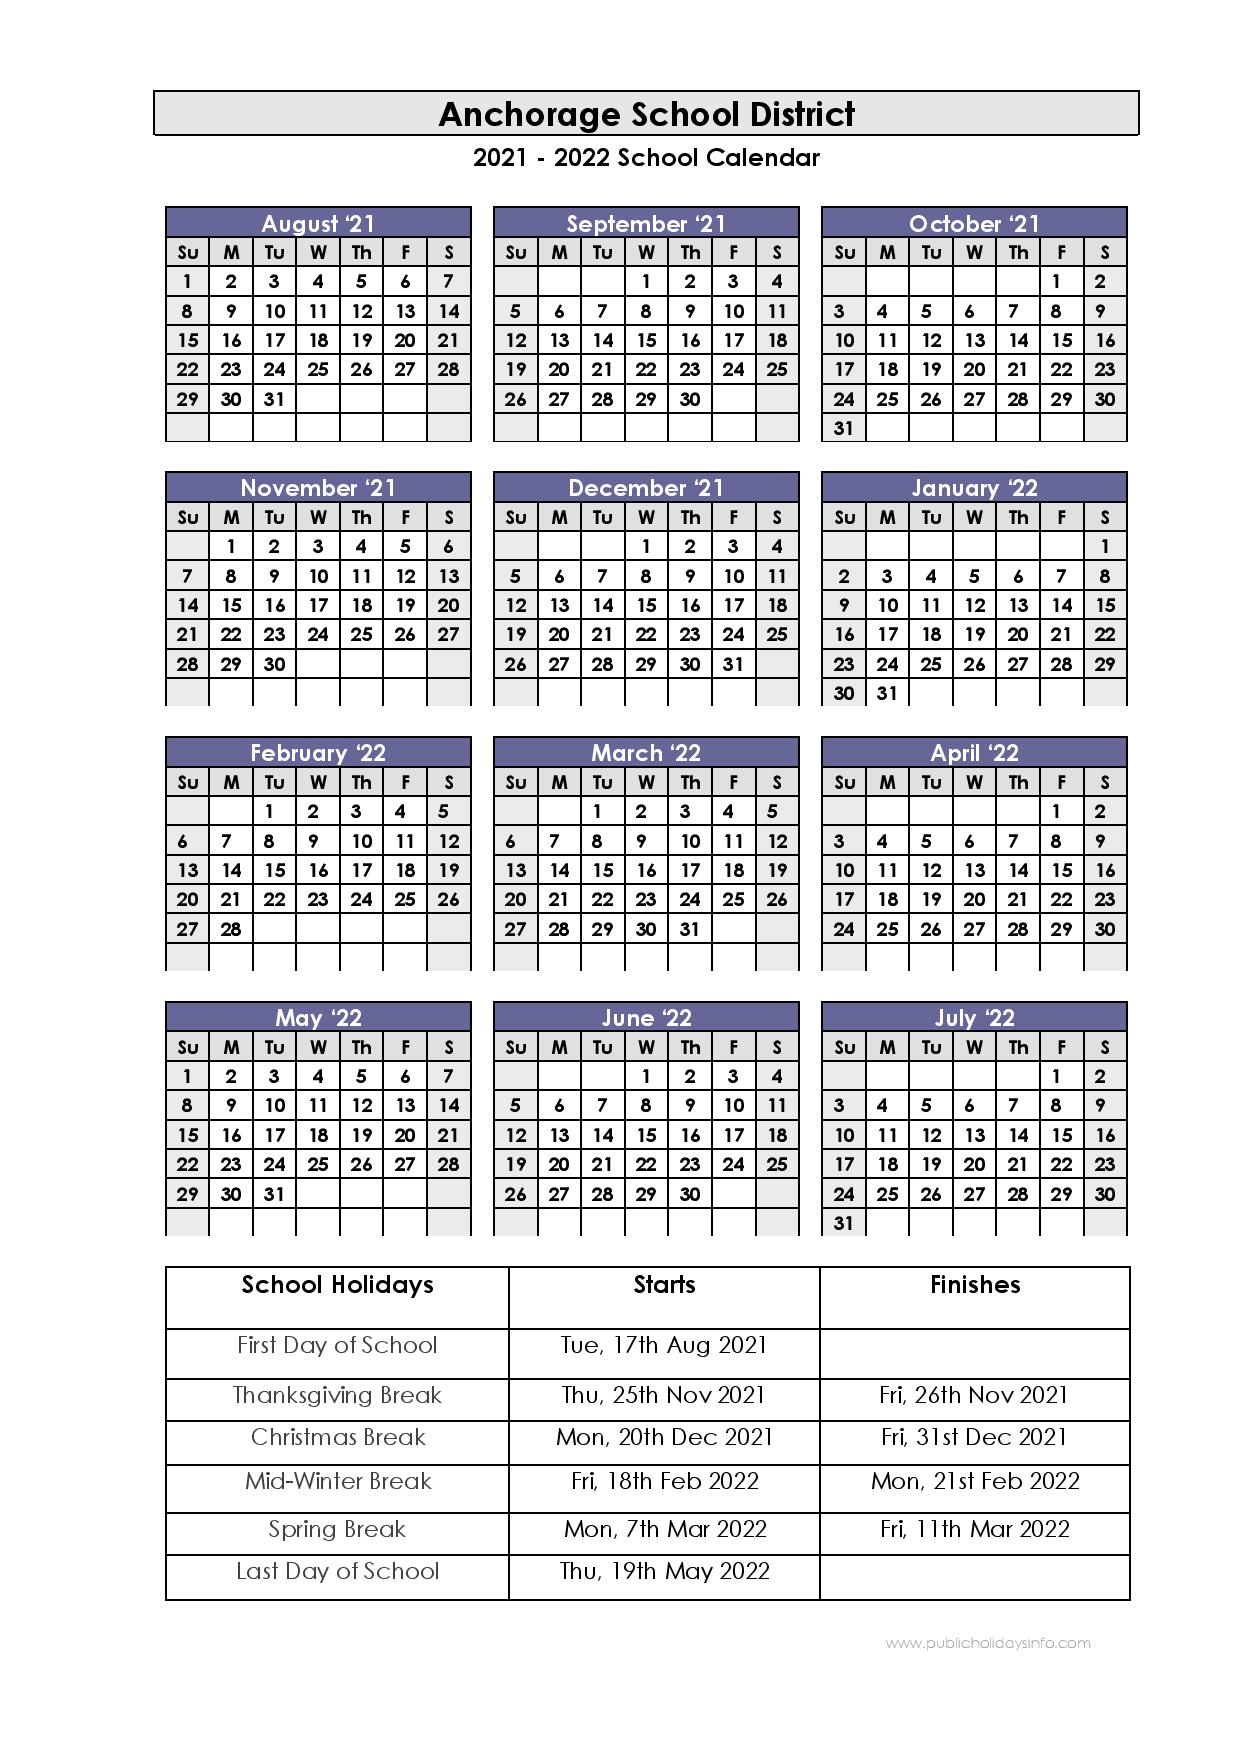 Anchorage School District Calendar 2021 And 2022